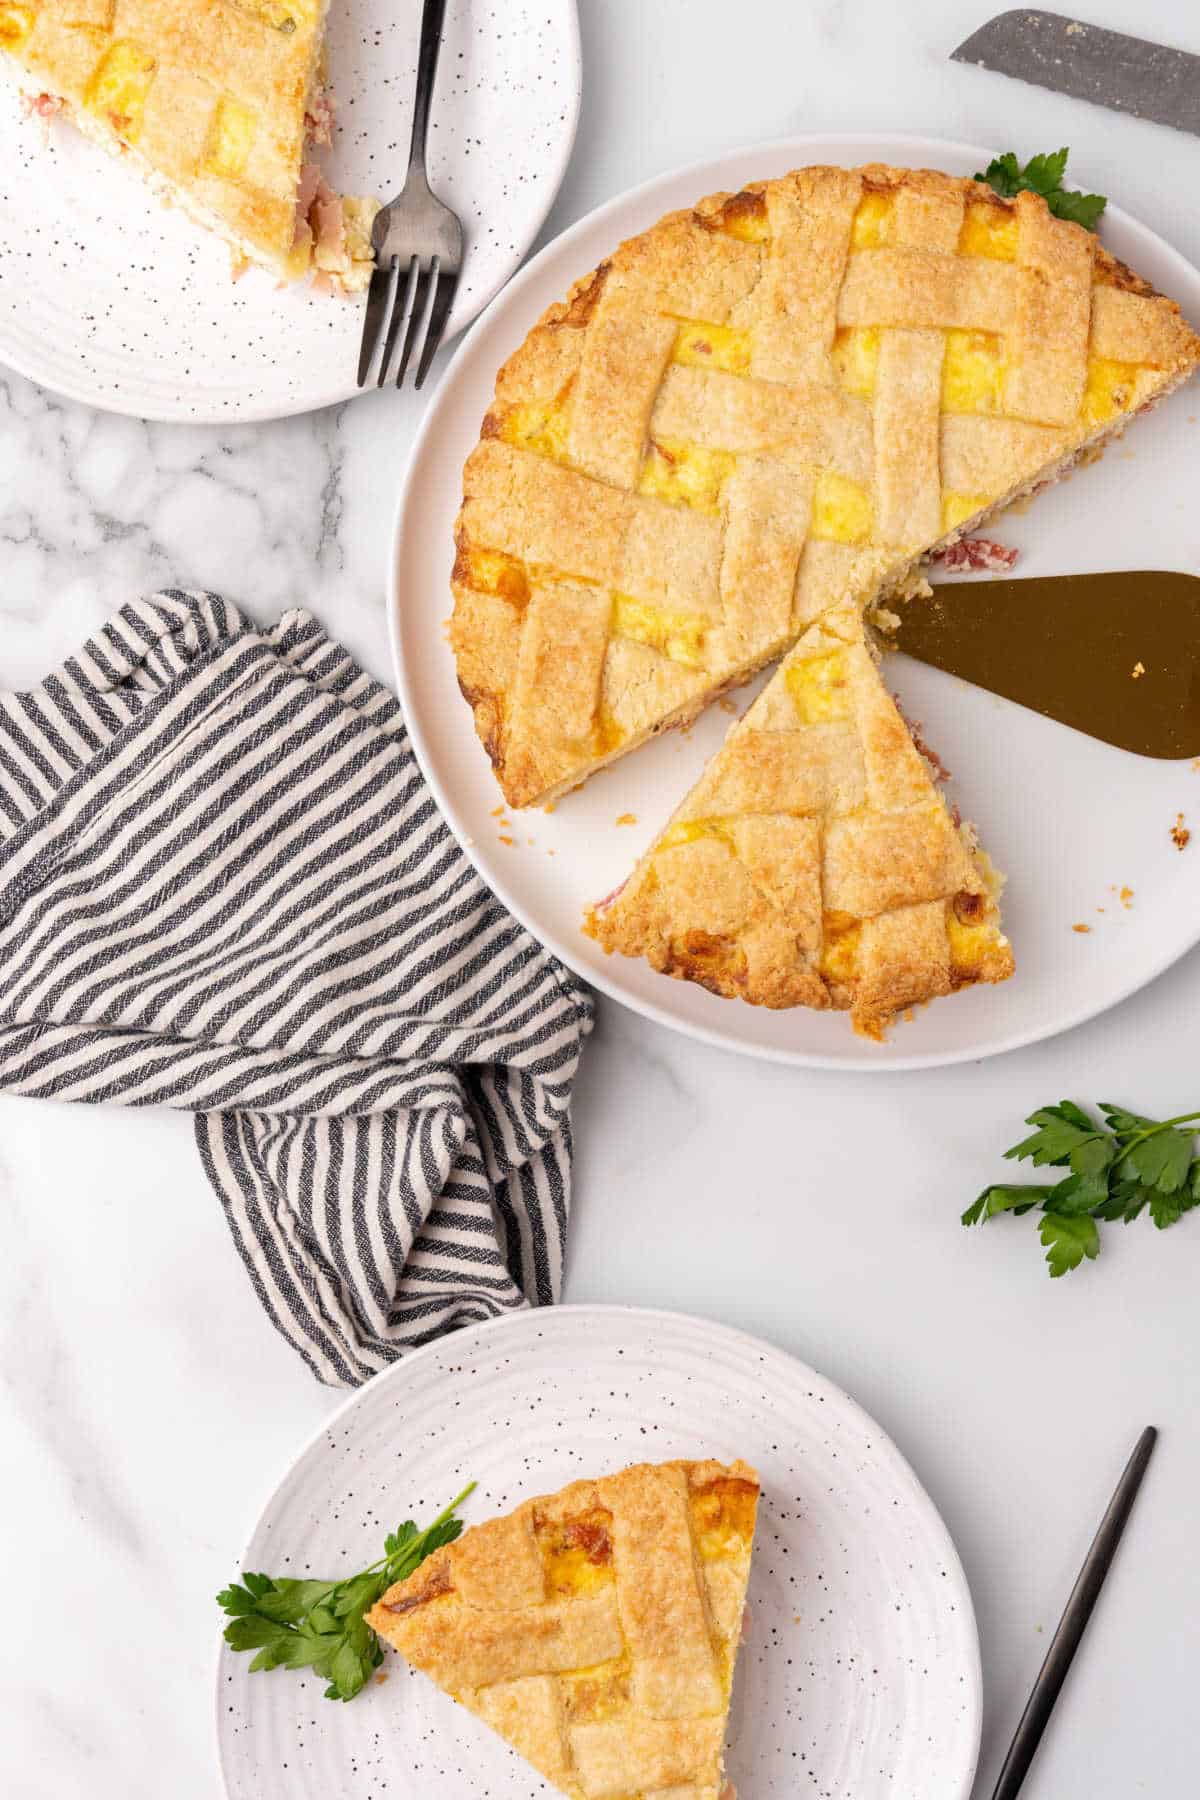 White marble with striped cloth and white plates with slices and pieces of lattice ricotta pie. 